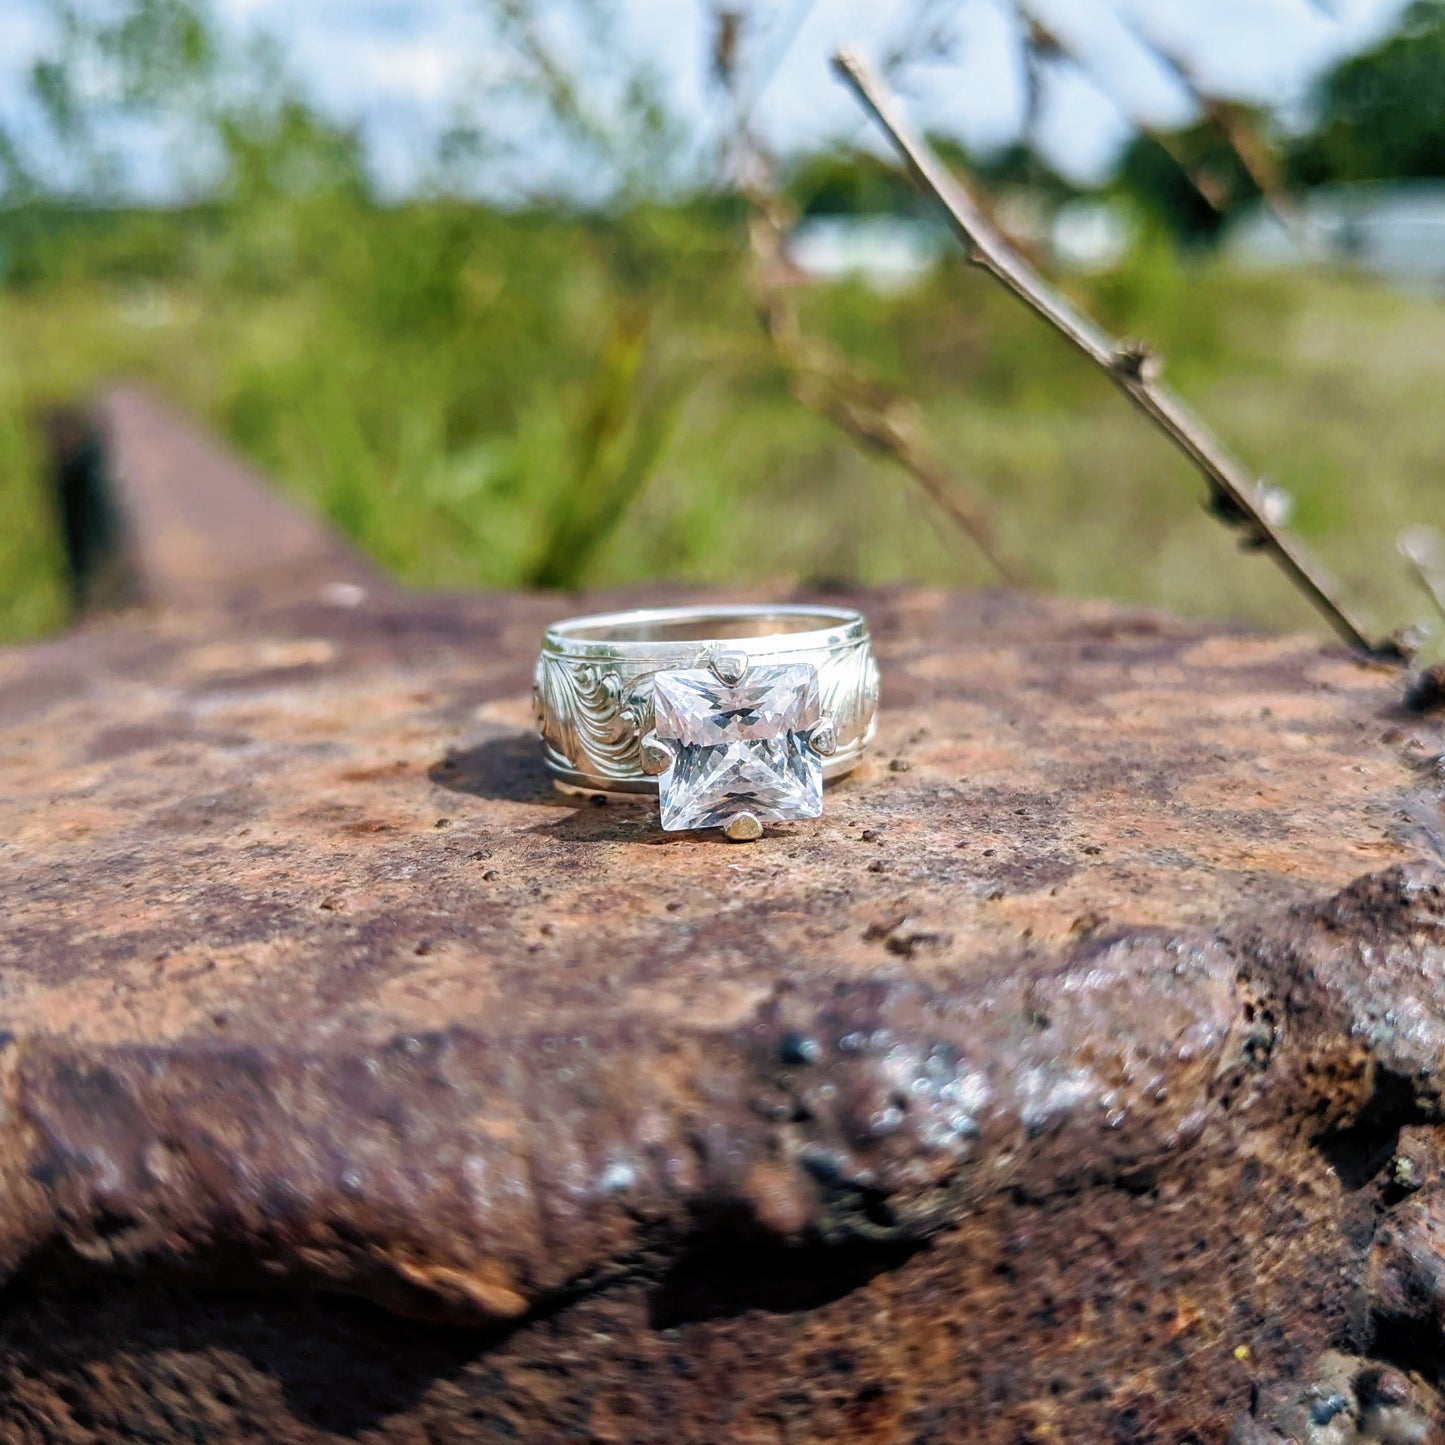 Hand Engraved Engagement Ring, Sterling Silver Western Wedding Ring, Square Stone, Anniversary Gift For Her, Design RNG00047 by Loreena Rose